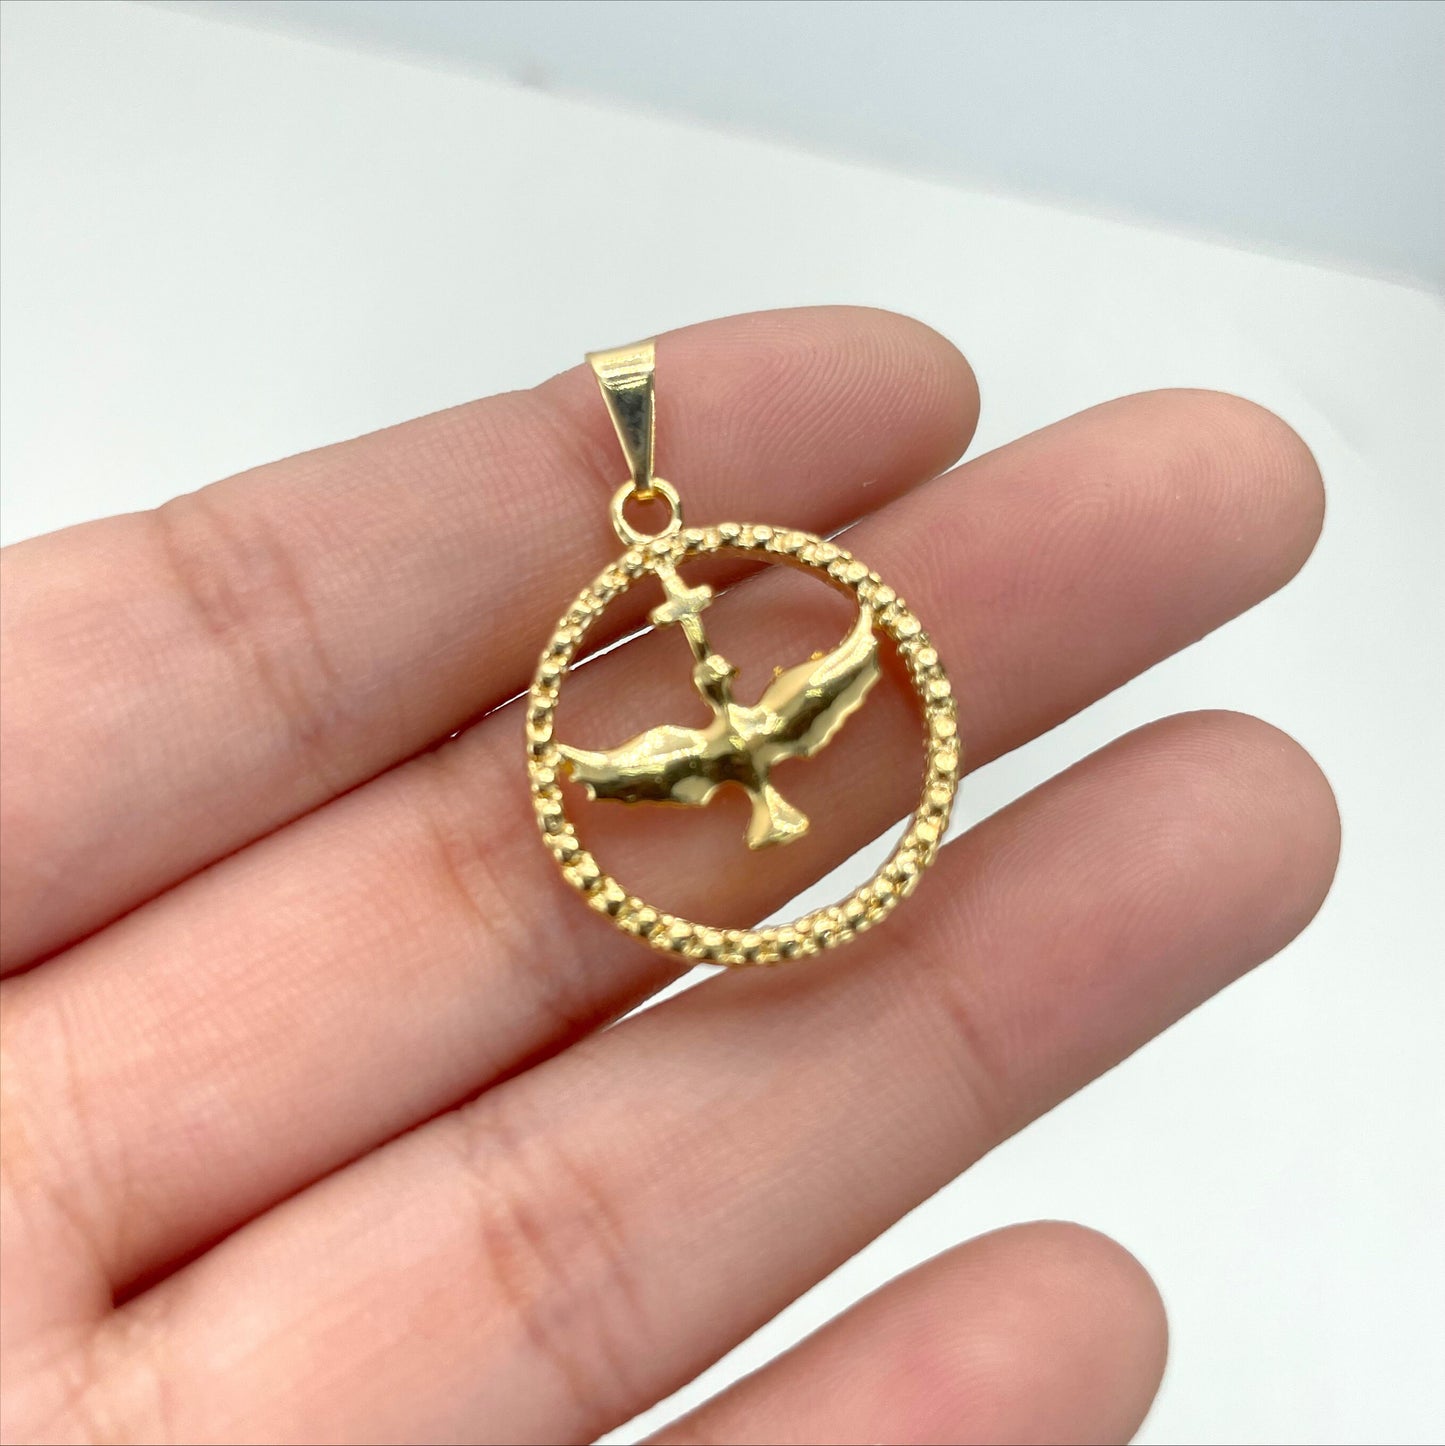 18k Gold Filled Circle Dove with Cross Charms Pendant Wholesale Jewelry Making Supplies